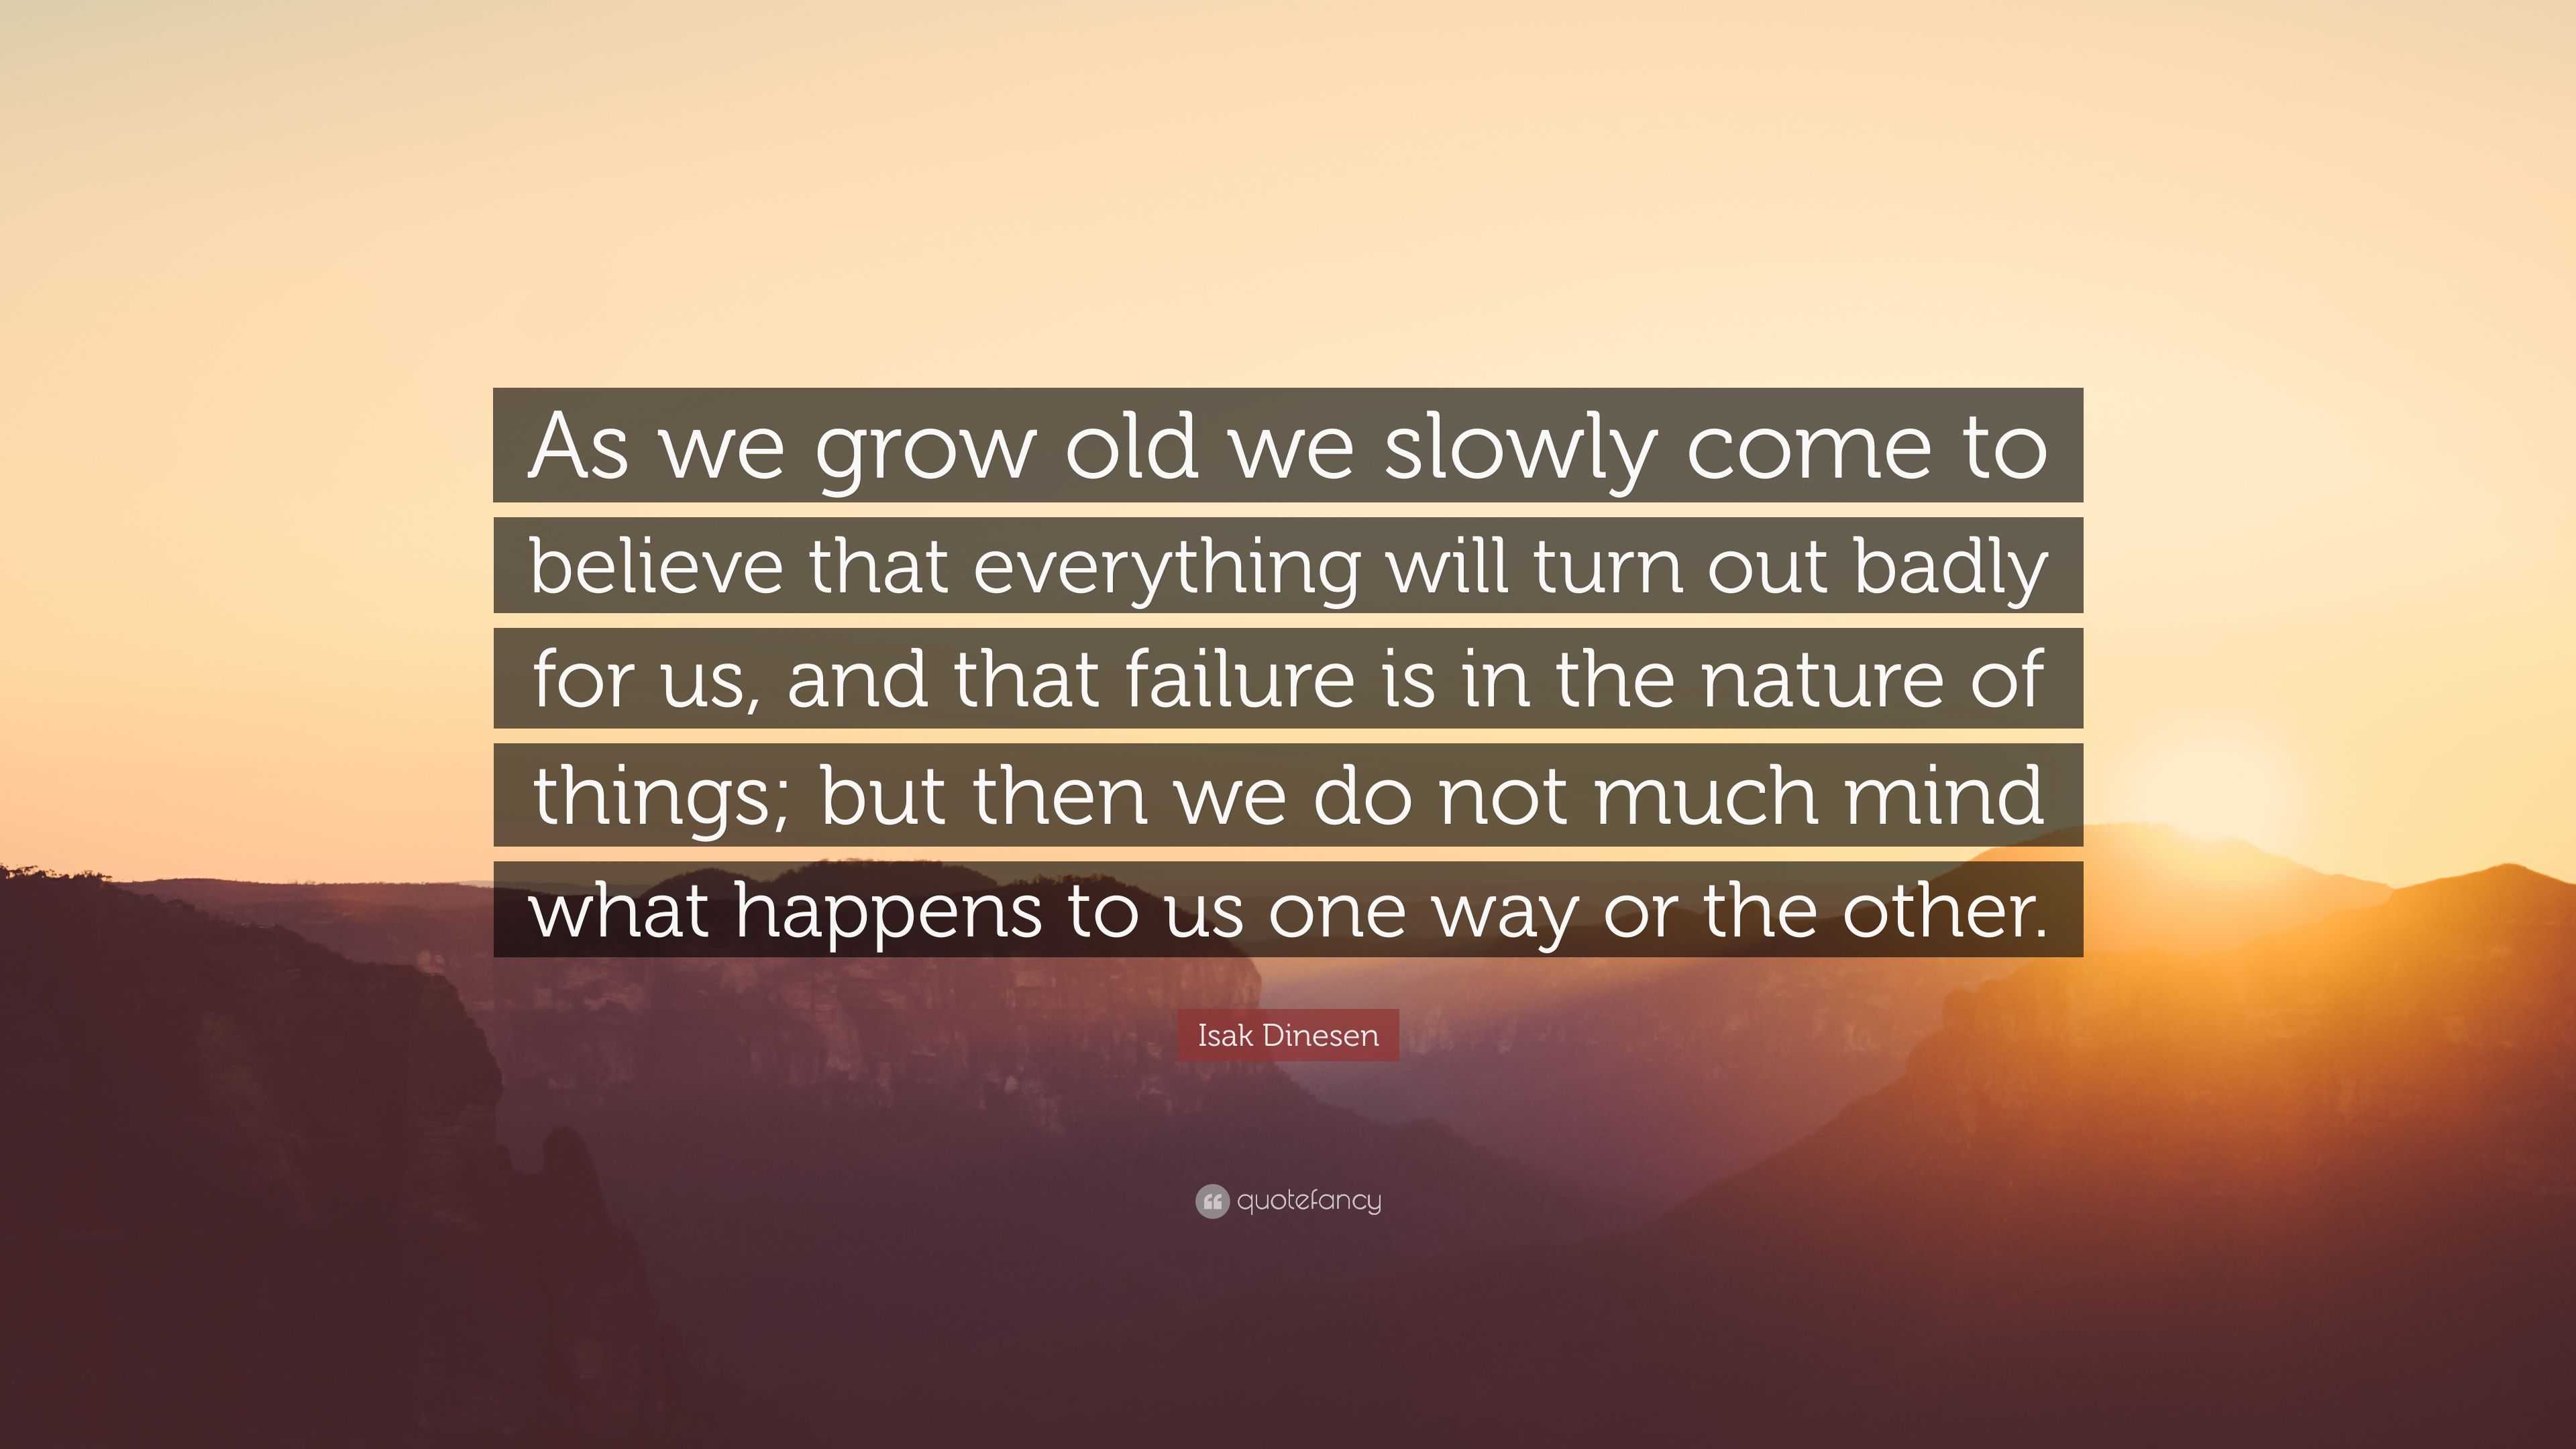 Isak Dinesen Quote: “As we grow old we slowly come to believe that ...